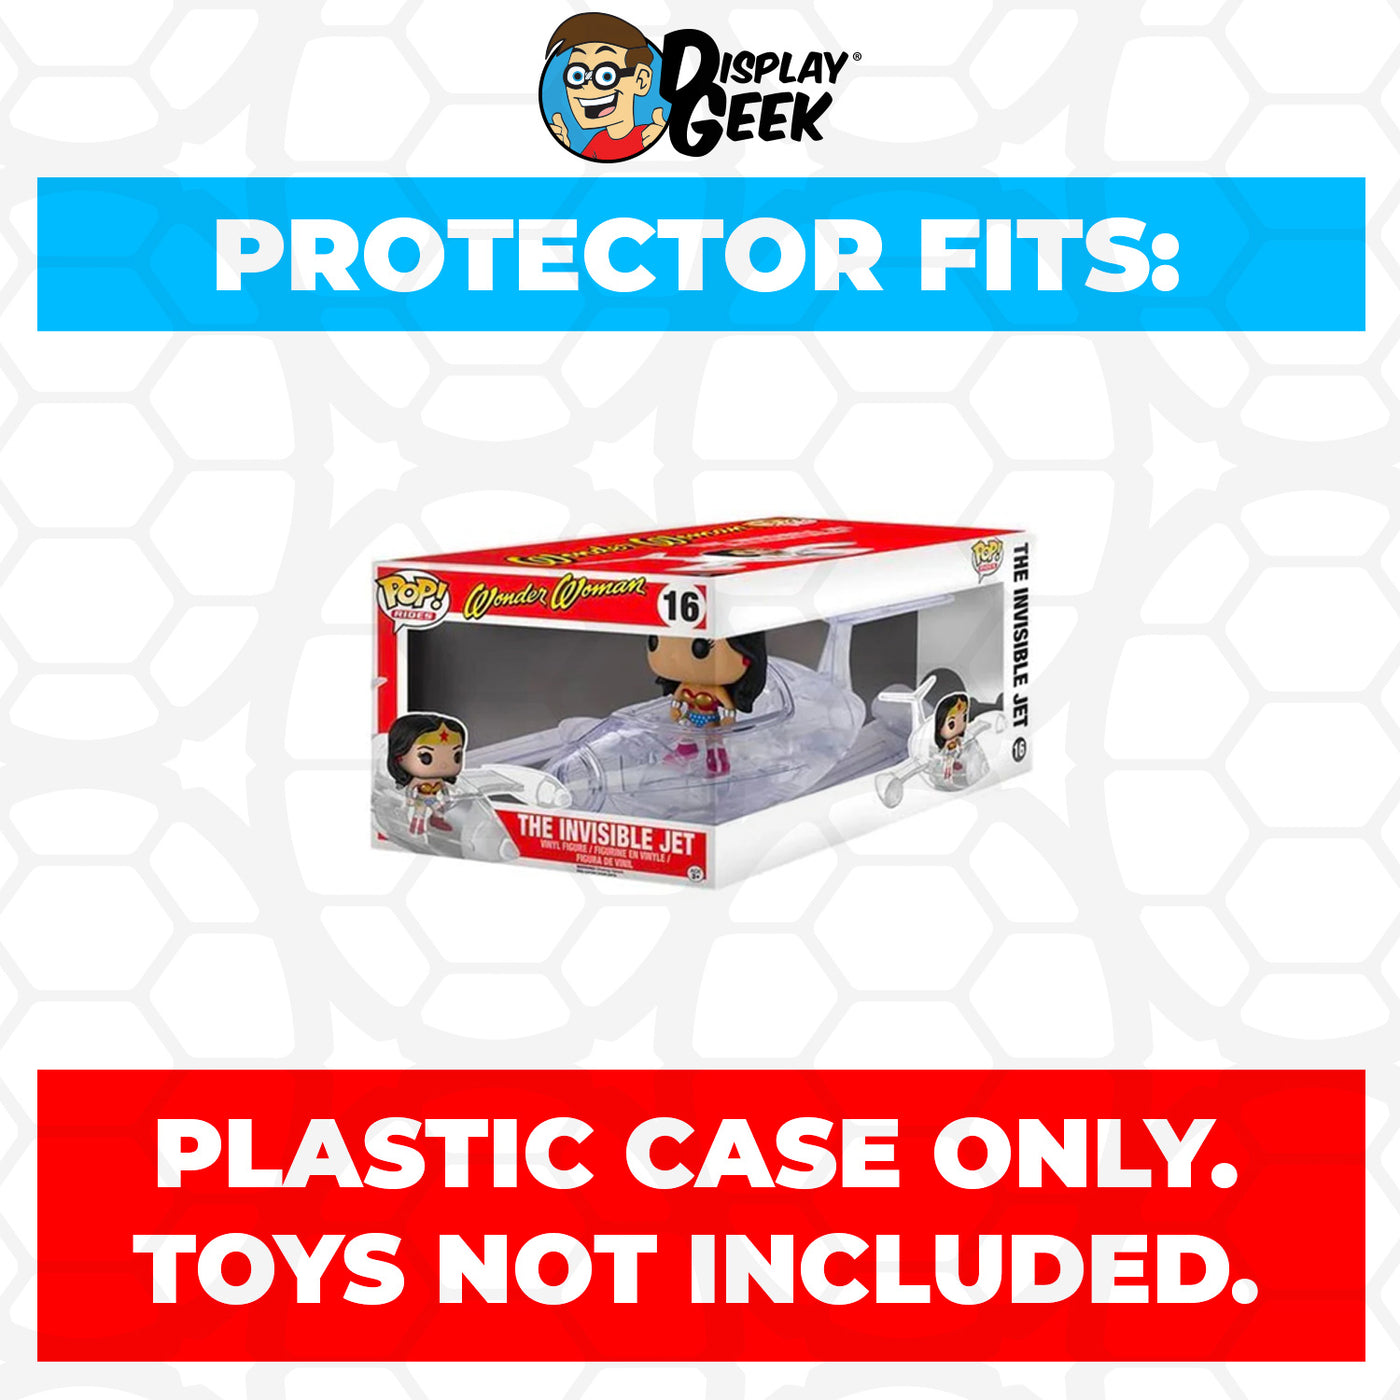 Pop Protector for The Invisible Jet with Wonder Woman #16 Funko Pop Rides on The Protector Guide App by Display Geek